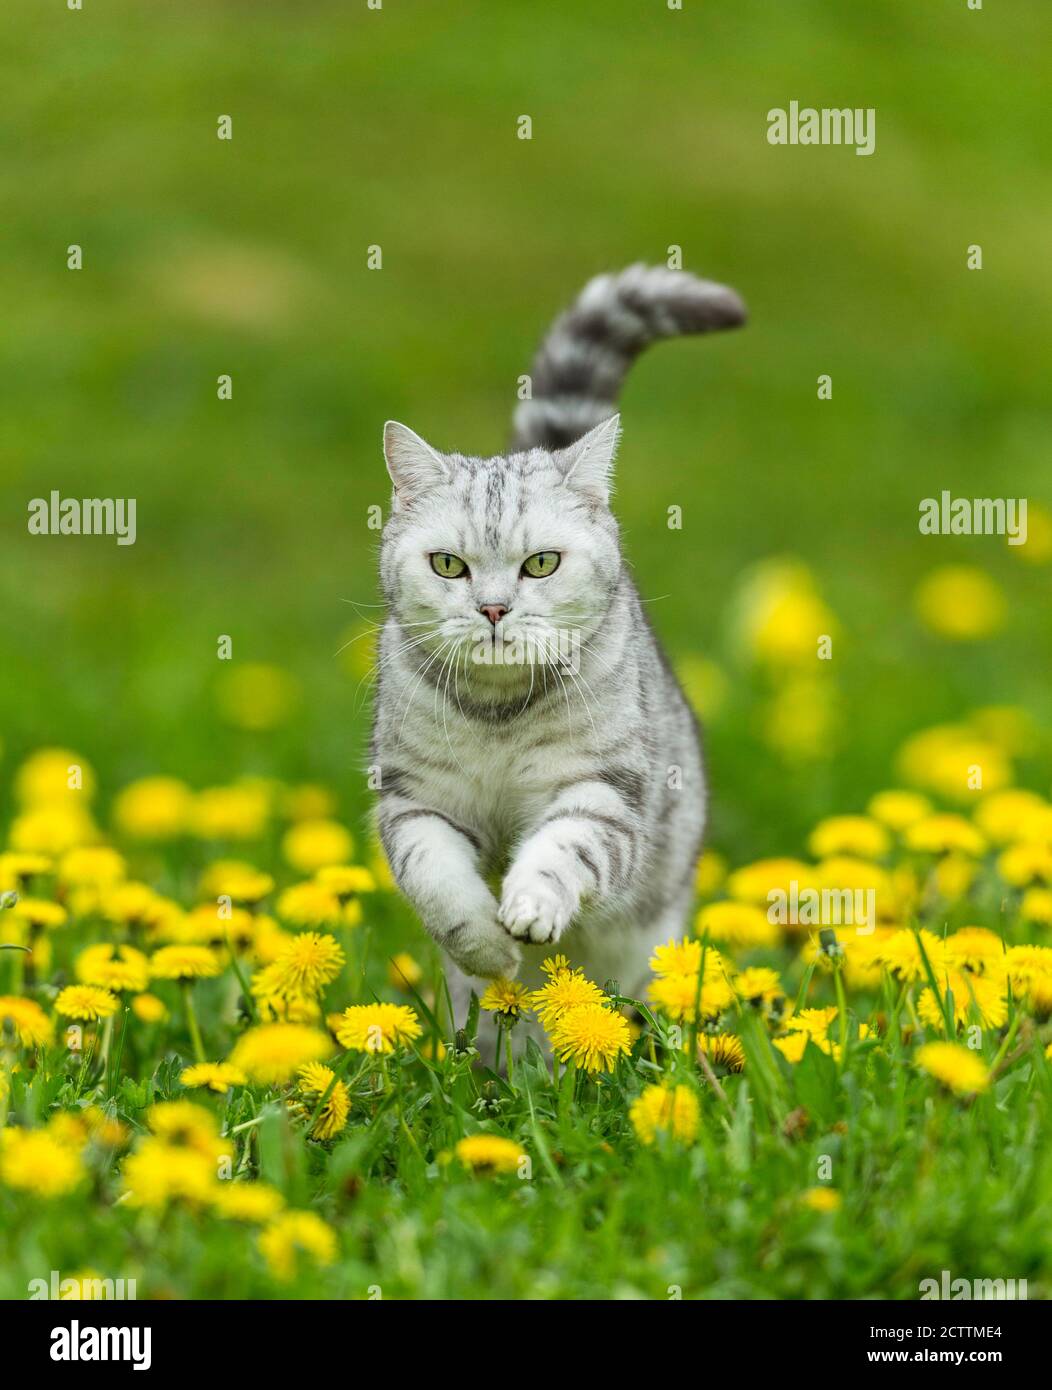 British Shorthair. Tabby adult cat running in a meadow with flowering dandelion. Stock Photo